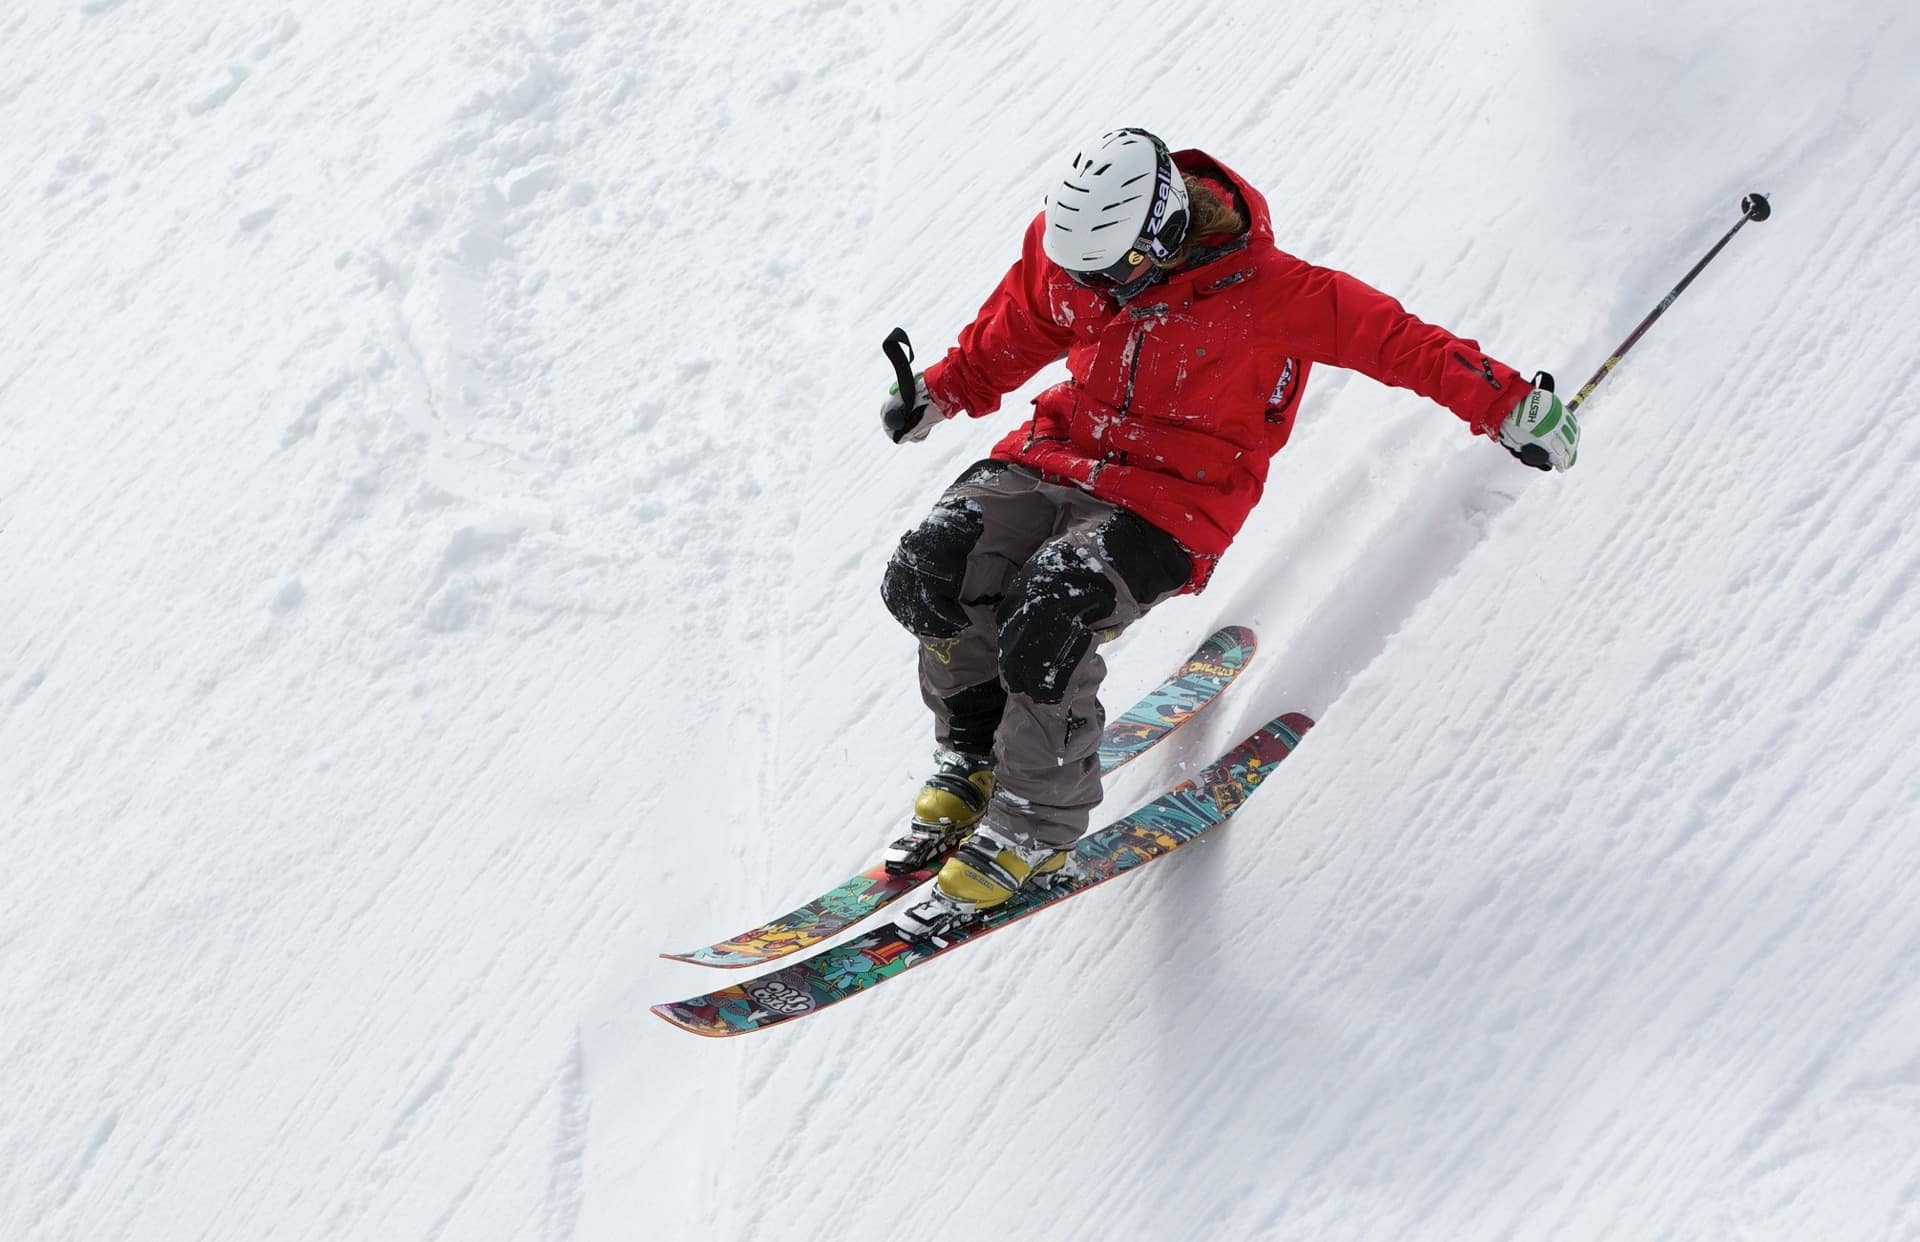 The 5 Main Differences Between Skiing and Snowboarding